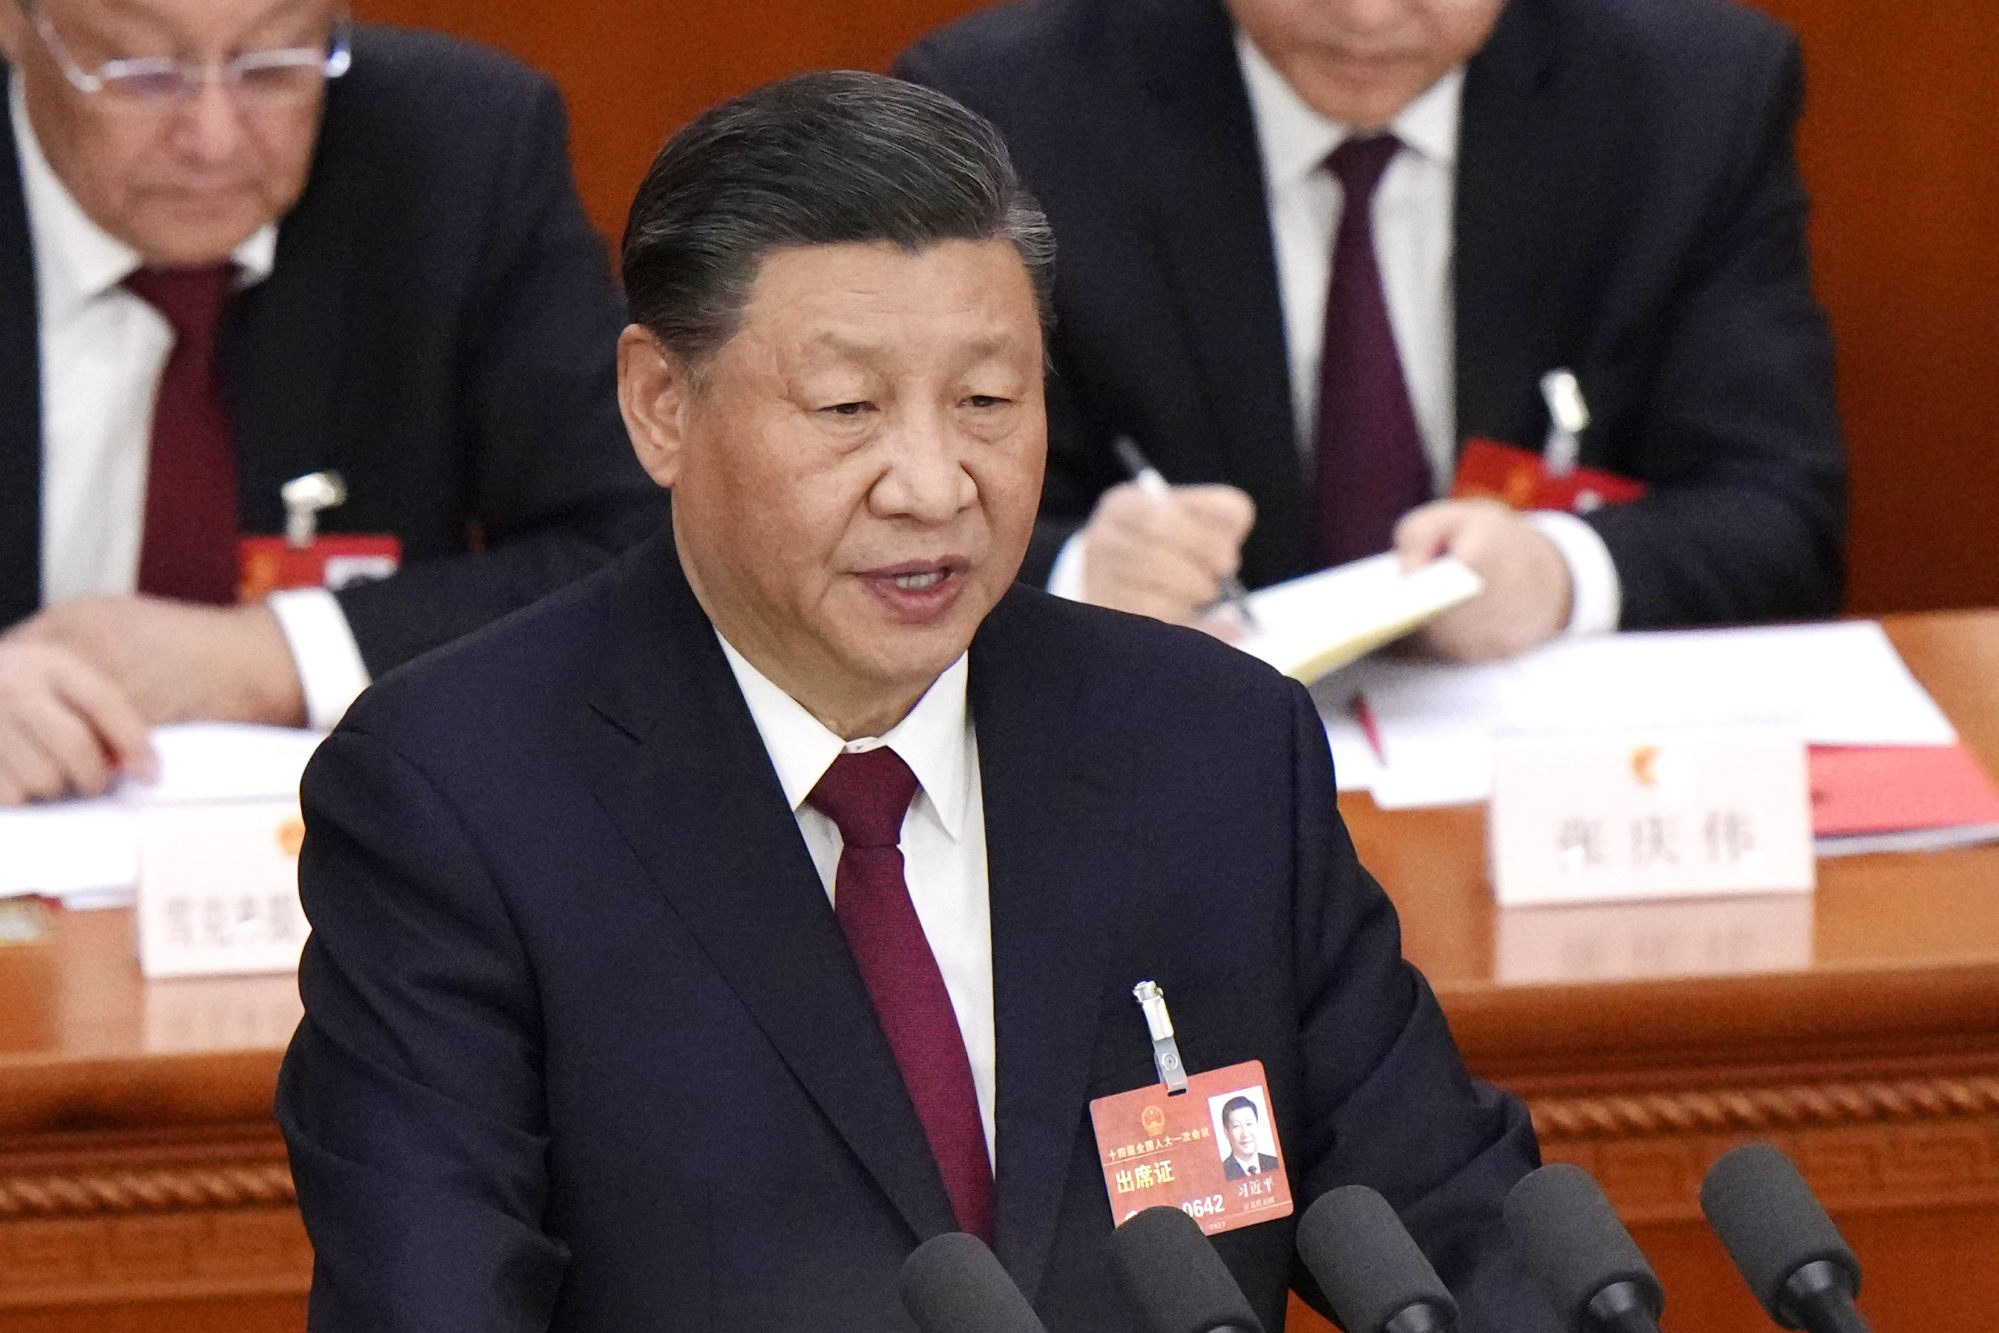 Chinese President Xi Jinping delivering a speech at the closing ceremony of the National People’s Congress in Beijing on March 13. Photo: Kyodo